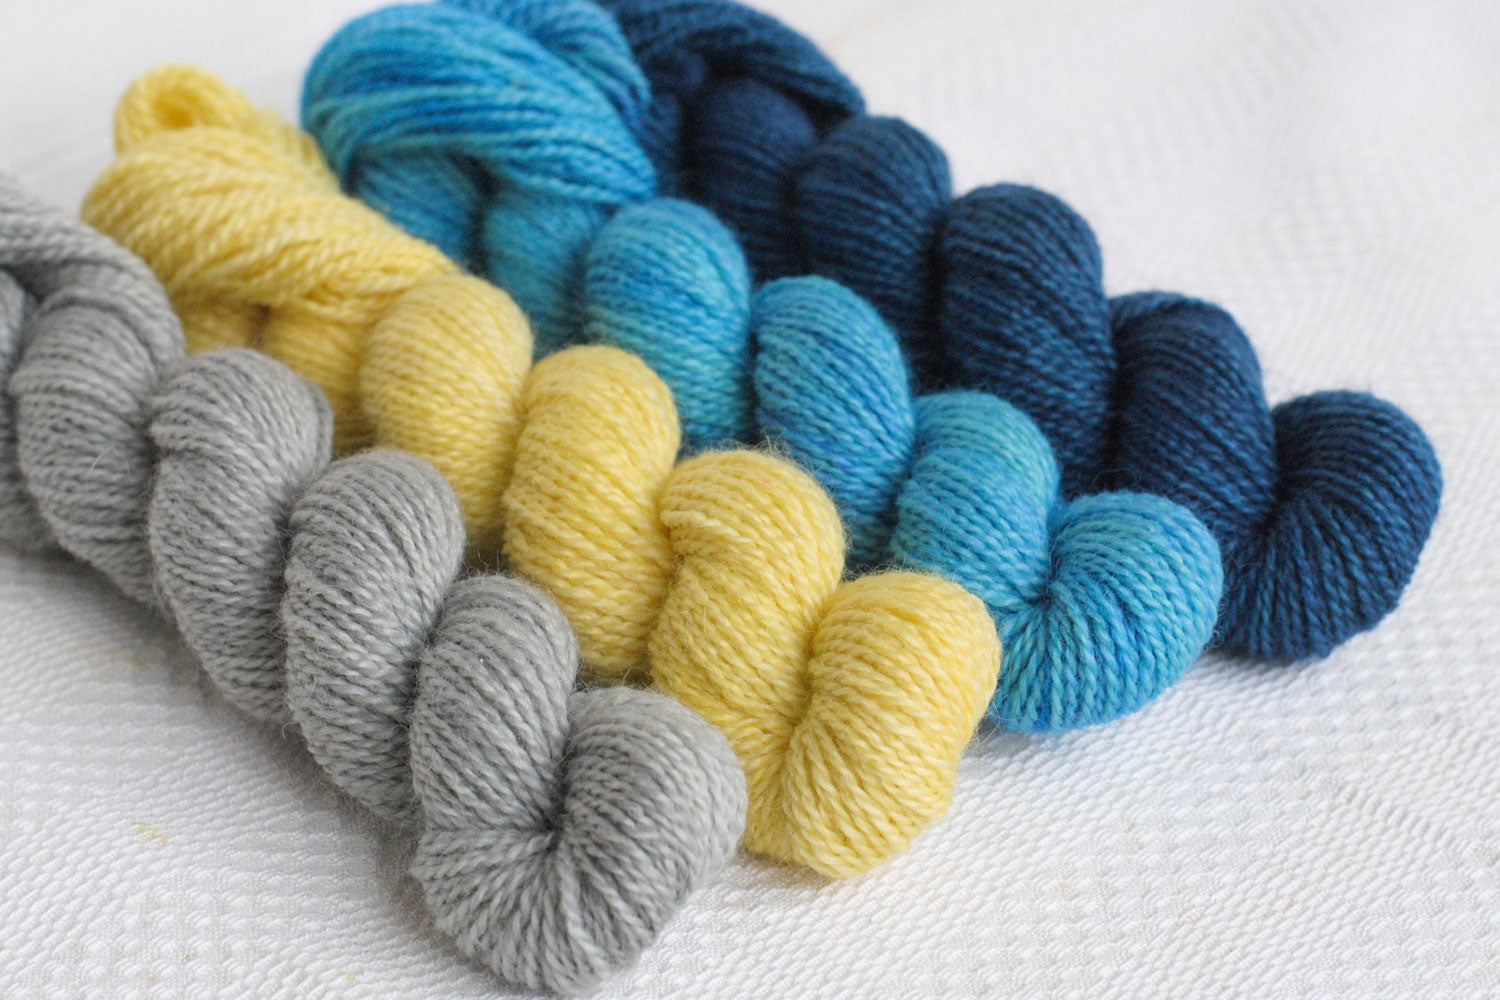 Set of four hand-dyed mini-skeins in pale grey, yellow, light blue, and dark blue